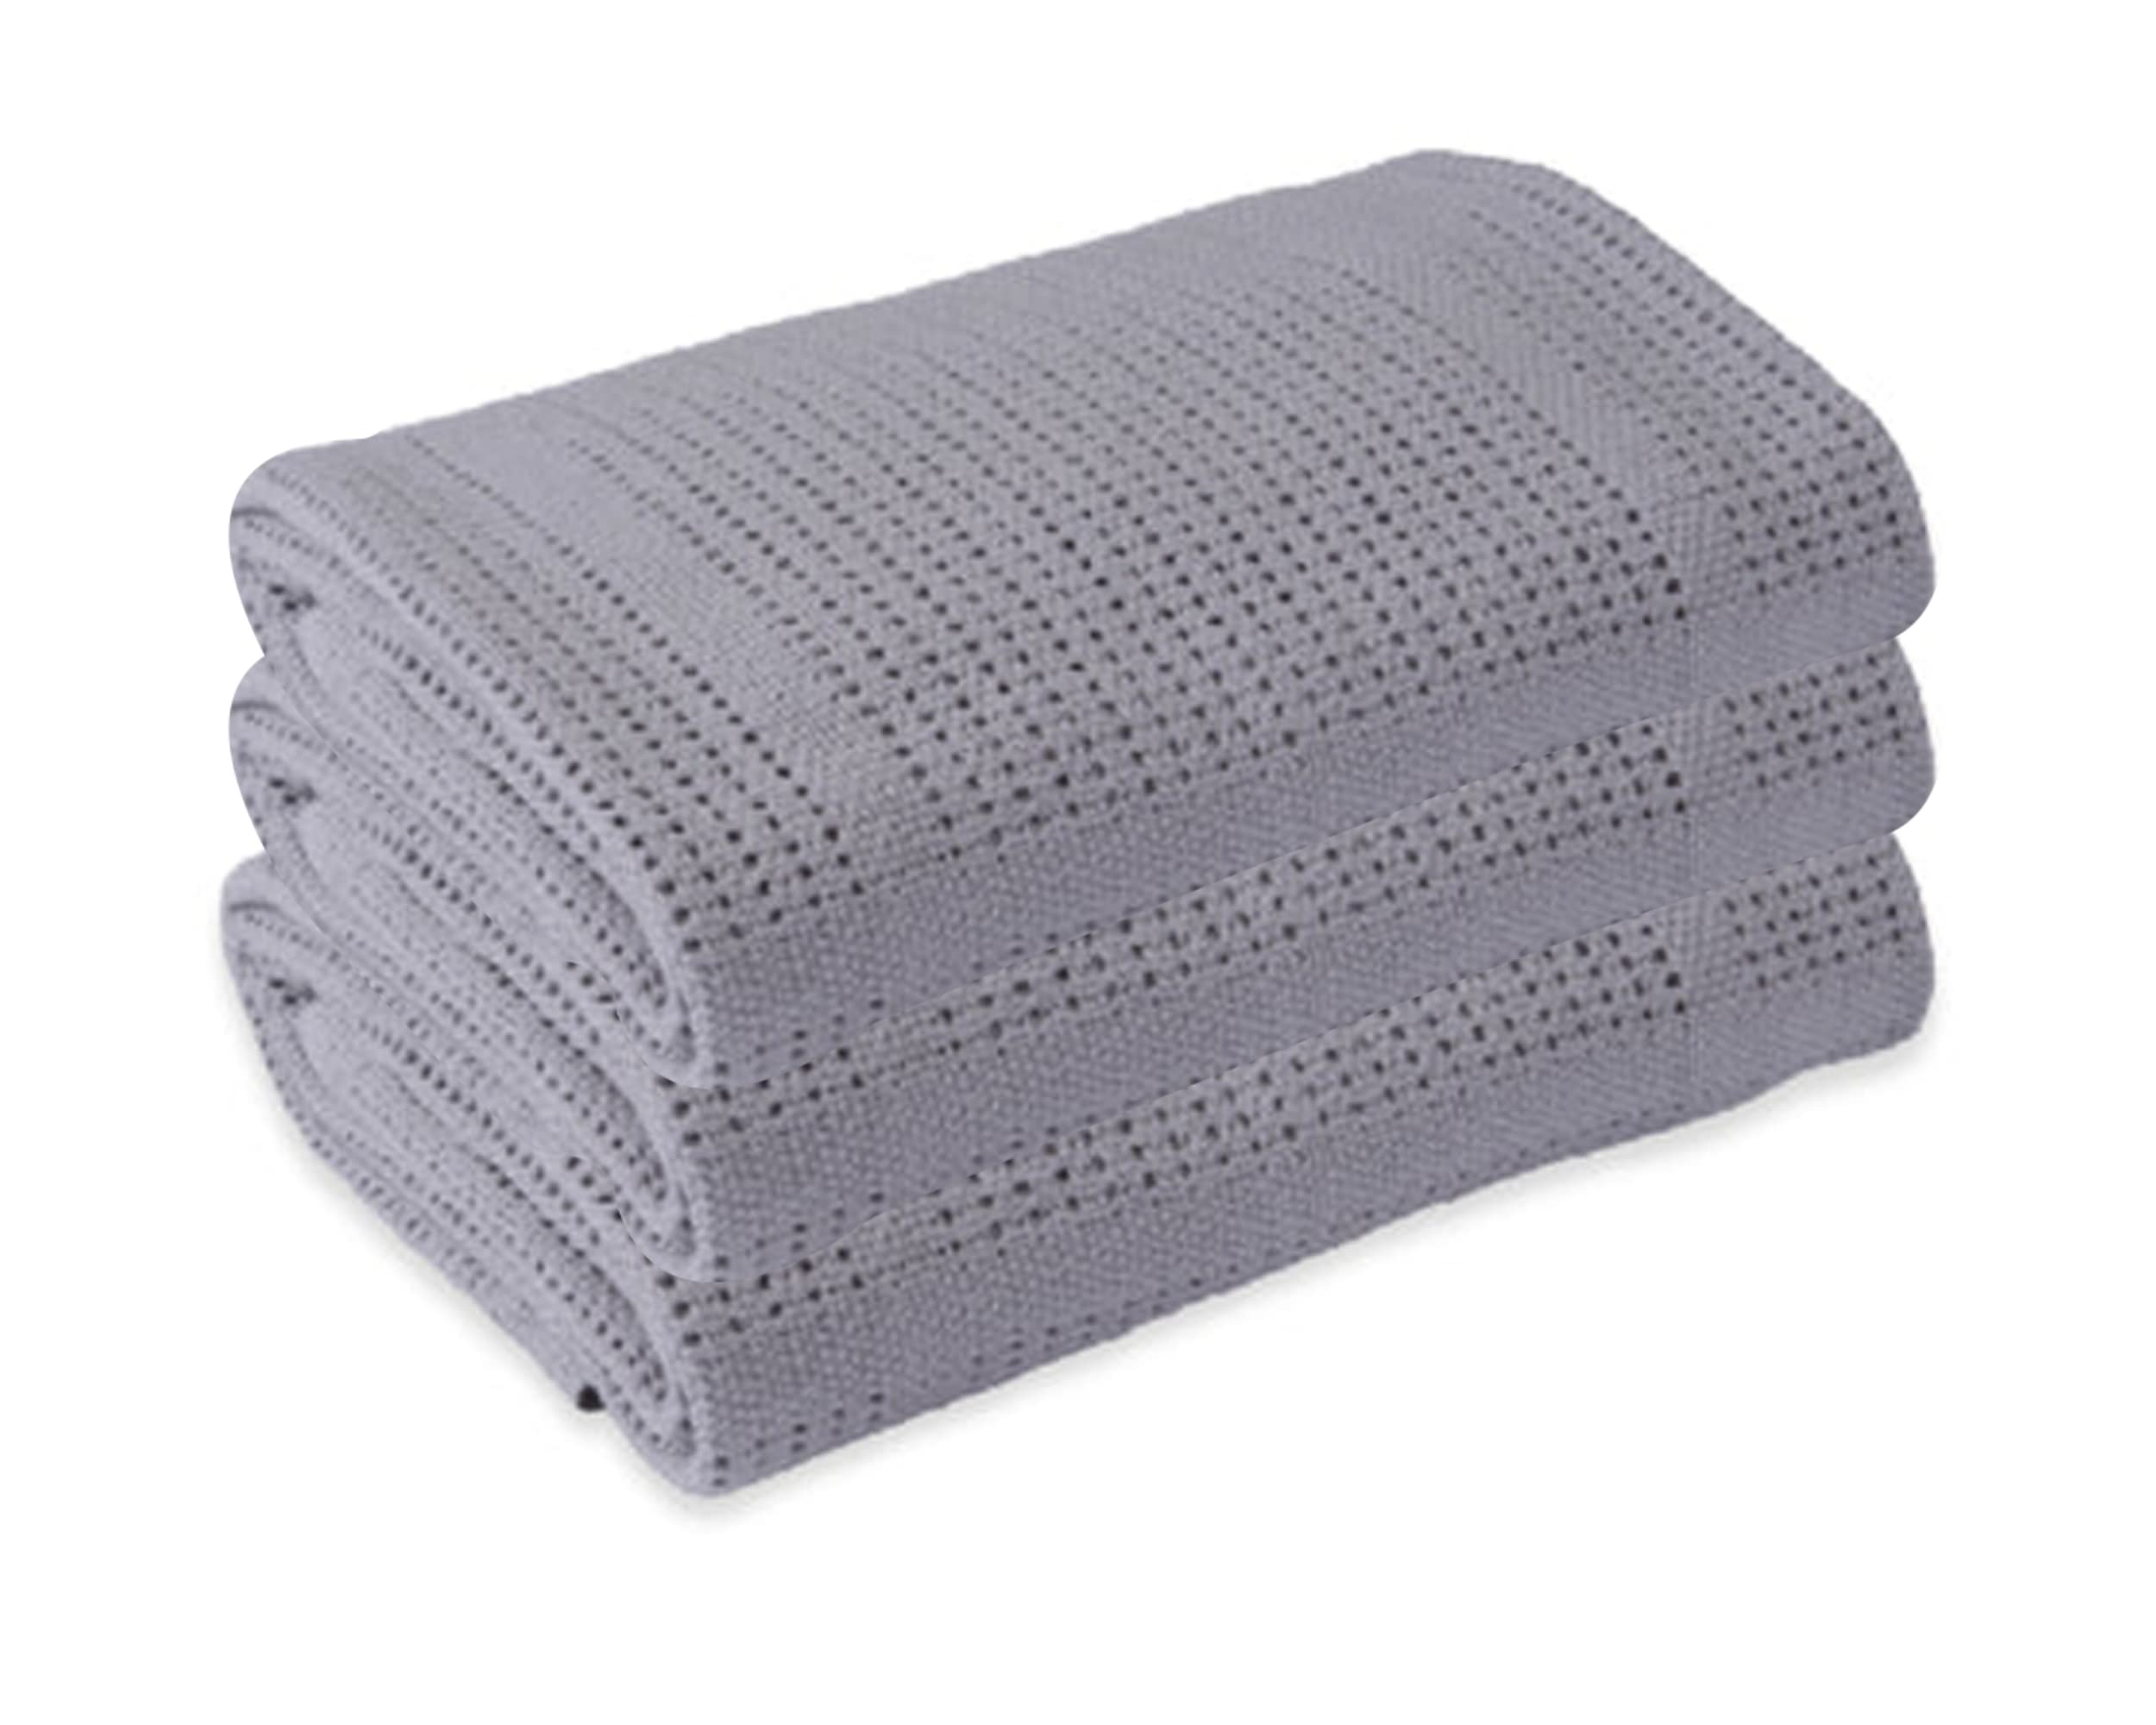 Clair De Lune | Warm & Cosy Cellular Baby Blanket | TRIPLE PACK | Extra Soft Breathable Cotton, Pram/Travel/Moses Basket (90 x 70 cm) GREY